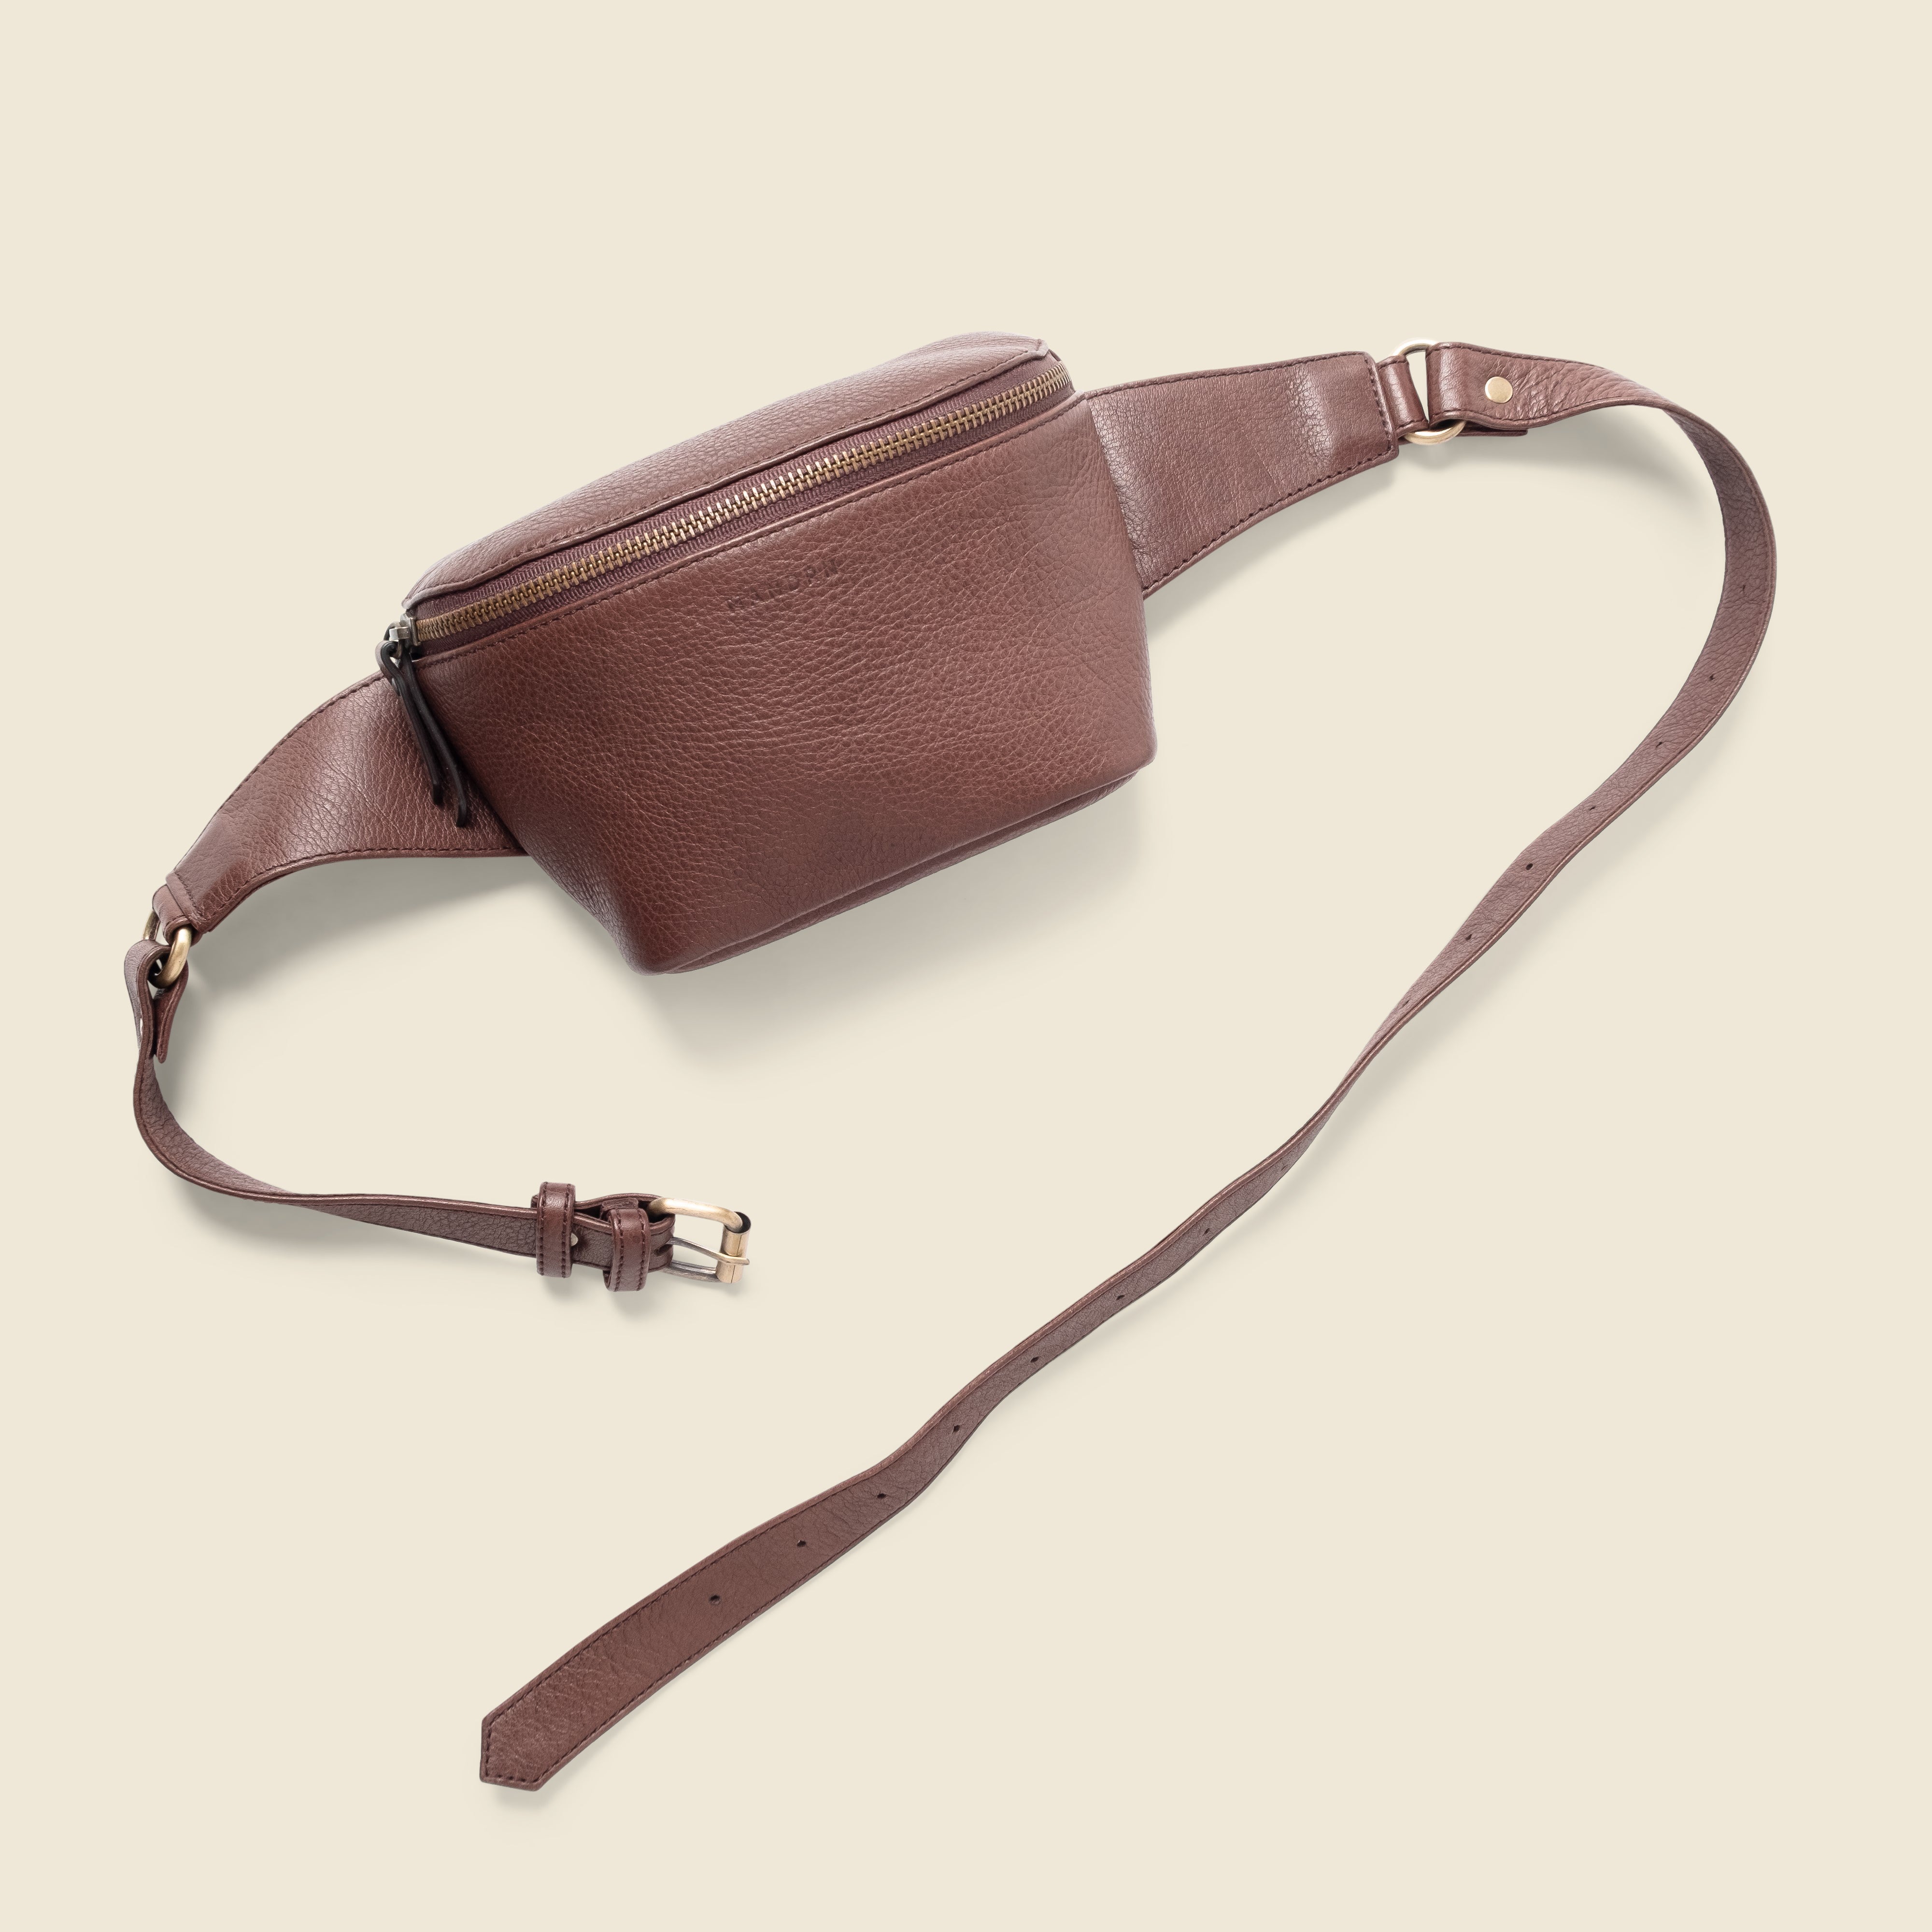 brown leather fanny pack bag for private events and corporate gifts.